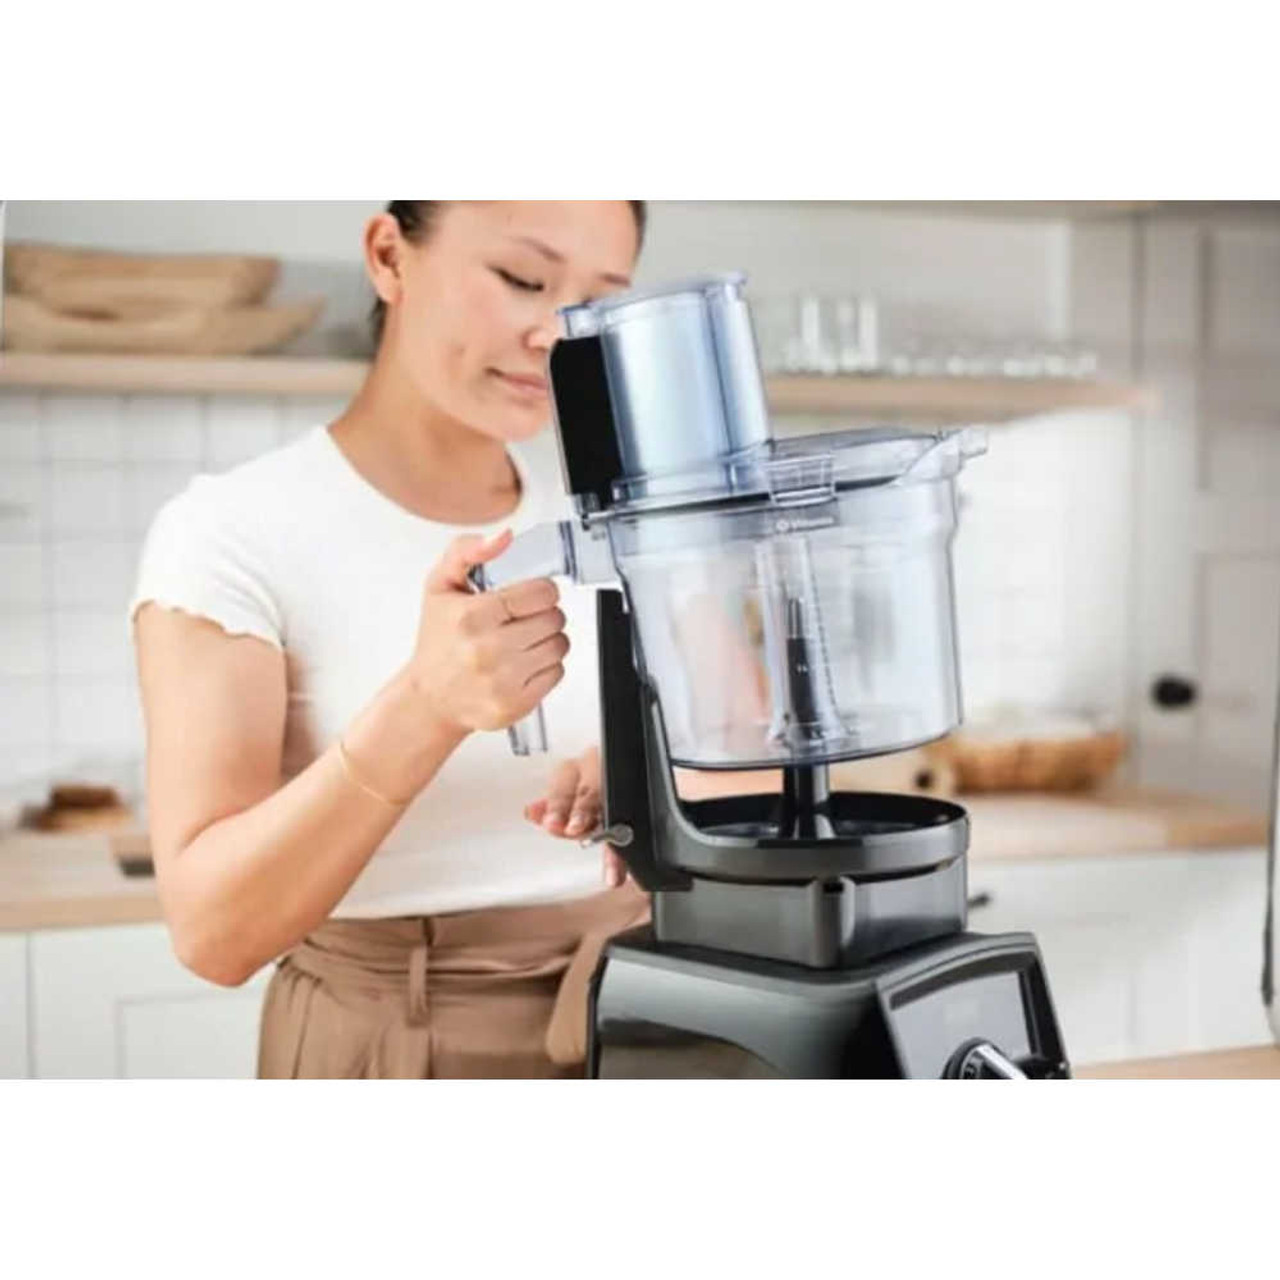 https://cdn11.bigcommerce.com/s-hccytny0od/images/stencil/1280x1280/products/4406/17202/Vitamix_Food_Processor_Attachment_6__32689.1636996046.jpg?c=2?imbypass=on